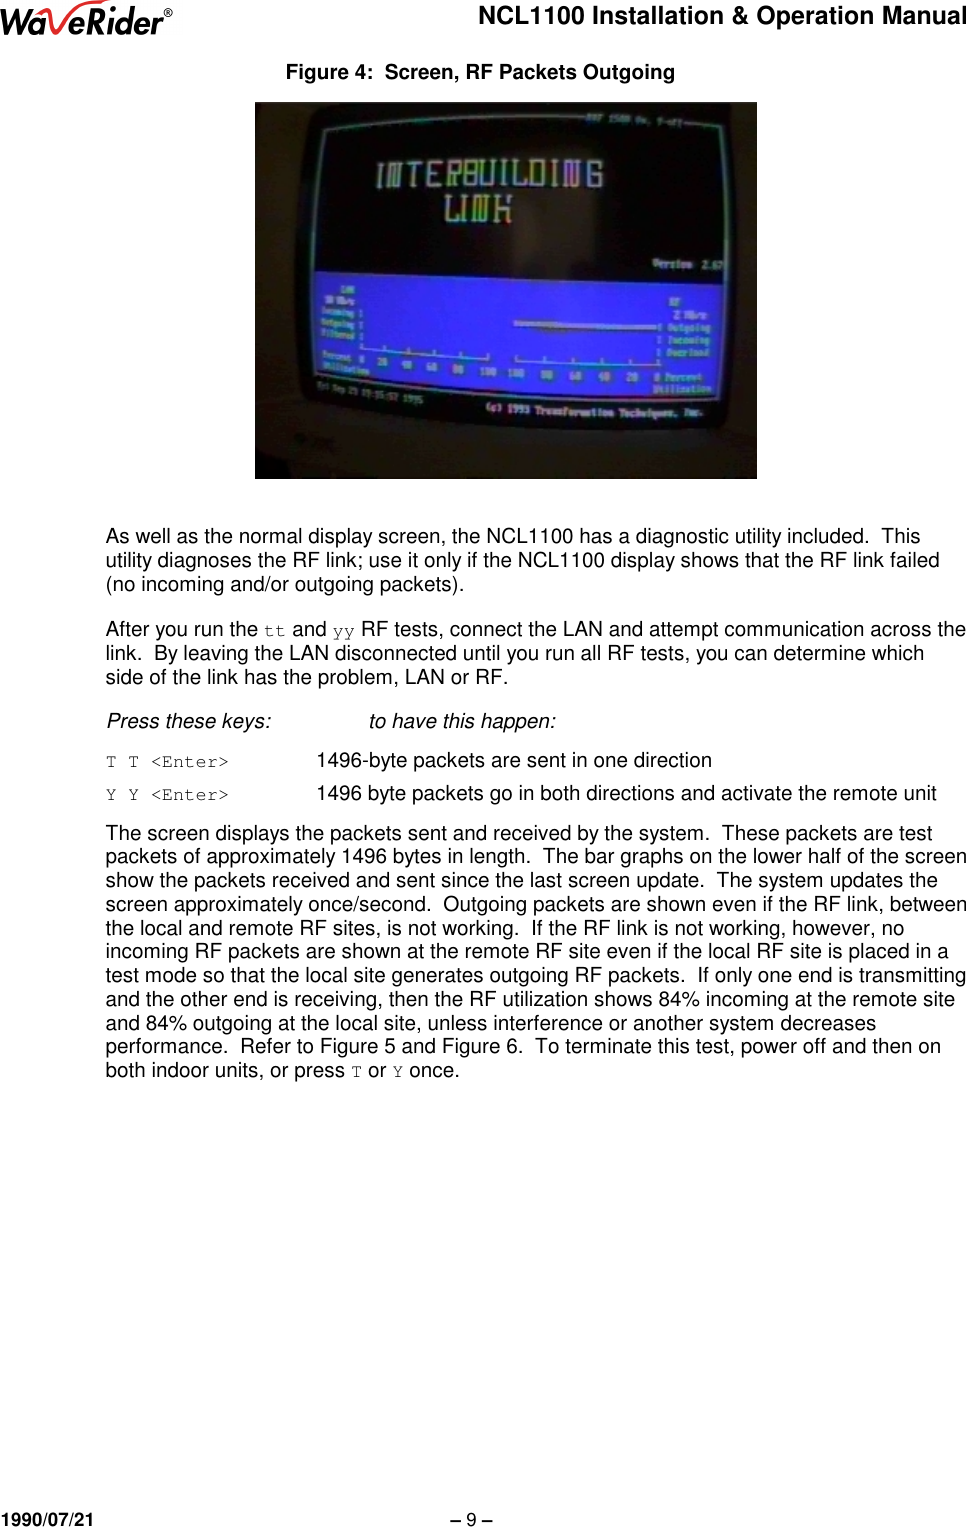 NCL1100 Installation &amp; Operation Manual1990/07/21 – 9 –Figure 4:  Screen, RF Packets OutgoingAs well as the normal display screen, the NCL1100 has a diagnostic utility included.  Thisutility diagnoses the RF link; use it only if the NCL1100 display shows that the RF link failed(no incoming and/or outgoing packets).After you run the tt and yy RF tests, connect the LAN and attempt communication across thelink.  By leaving the LAN disconnected until you run all RF tests, you can determine whichside of the link has the problem, LAN or RF.Press these keys: to have this happen:T T &lt;Enter&gt;     1496-byte packets are sent in one directionY Y &lt;Enter&gt;     1496 byte packets go in both directions and activate the remote unitThe screen displays the packets sent and received by the system.  These packets are testpackets of approximately 1496 bytes in length.  The bar graphs on the lower half of the screenshow the packets received and sent since the last screen update.  The system updates thescreen approximately once/second.  Outgoing packets are shown even if the RF link, betweenthe local and remote RF sites, is not working.  If the RF link is not working, however, noincoming RF packets are shown at the remote RF site even if the local RF site is placed in atest mode so that the local site generates outgoing RF packets.  If only one end is transmittingand the other end is receiving, then the RF utilization shows 84% incoming at the remote siteand 84% outgoing at the local site, unless interference or another system decreasesperformance.  Refer to Figure 5 and Figure 6.  To terminate this test, power off and then onboth indoor units, or press T or Y once.